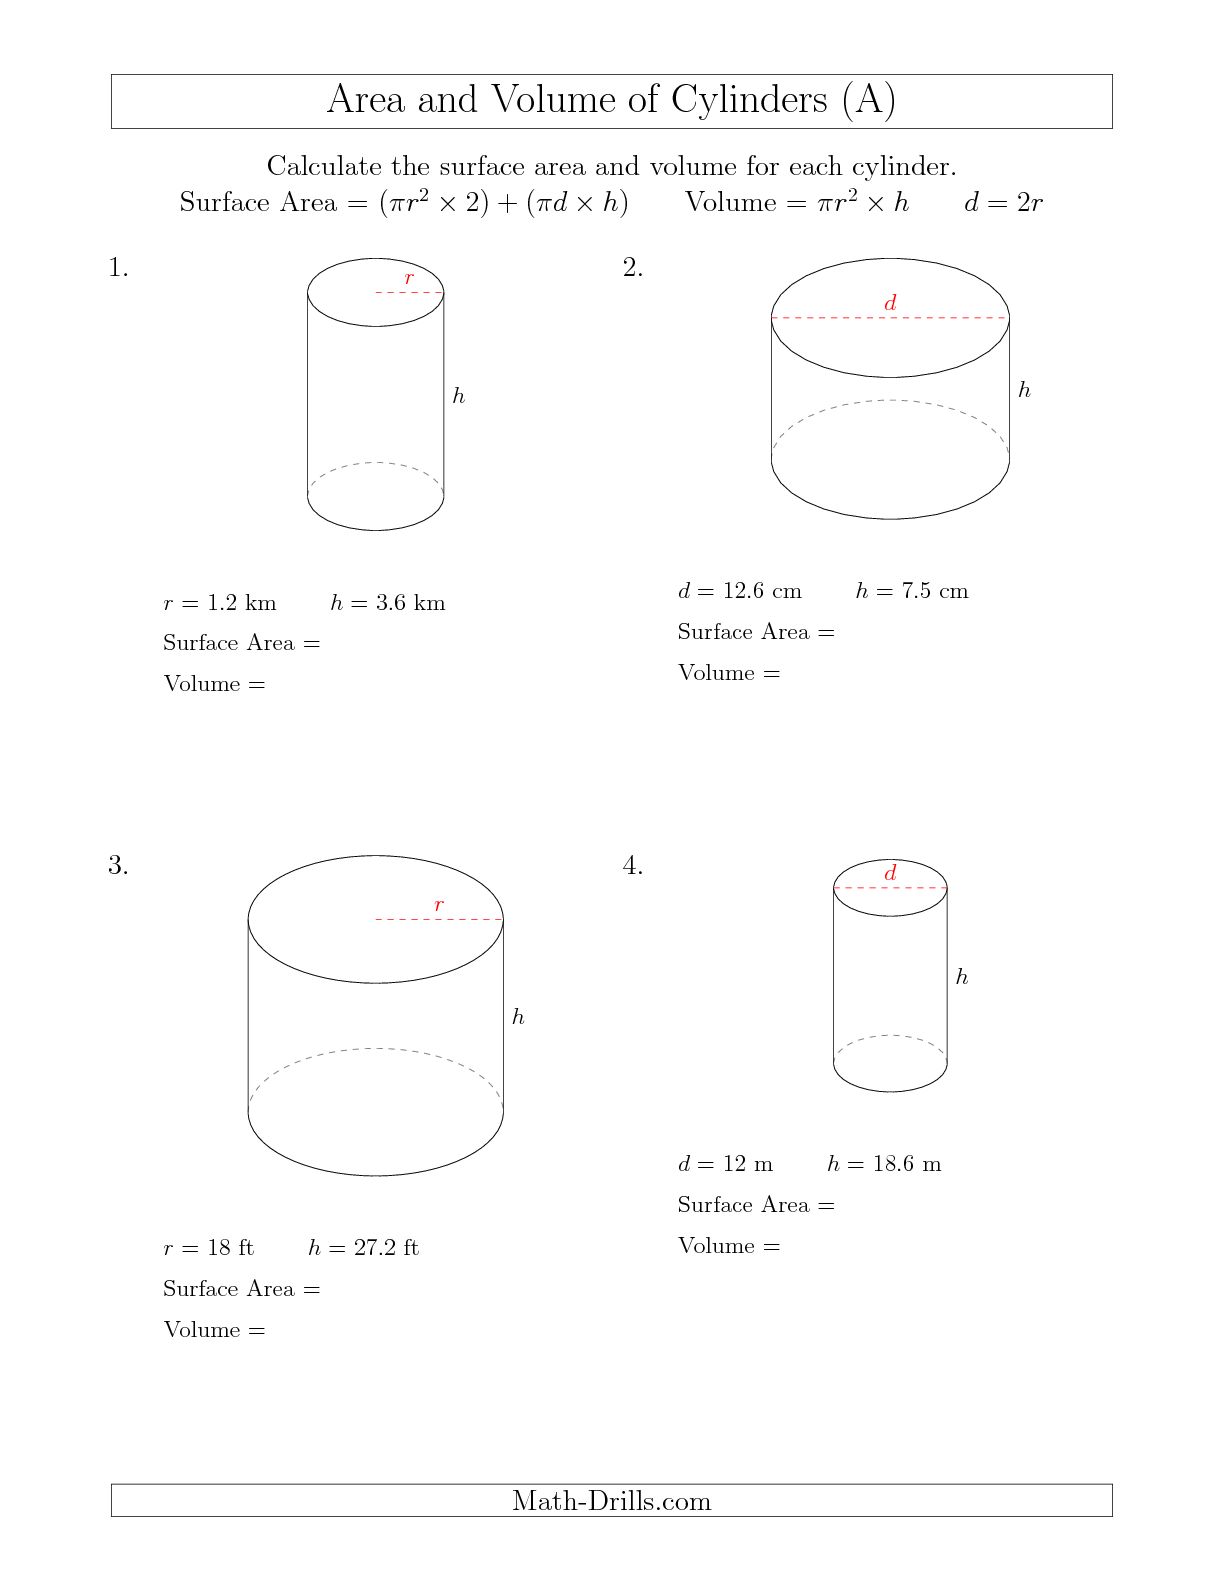 16-best-images-of-cone-cylinder-and-sphere-worksheet-surface-area-cylinder-worksheet-cone